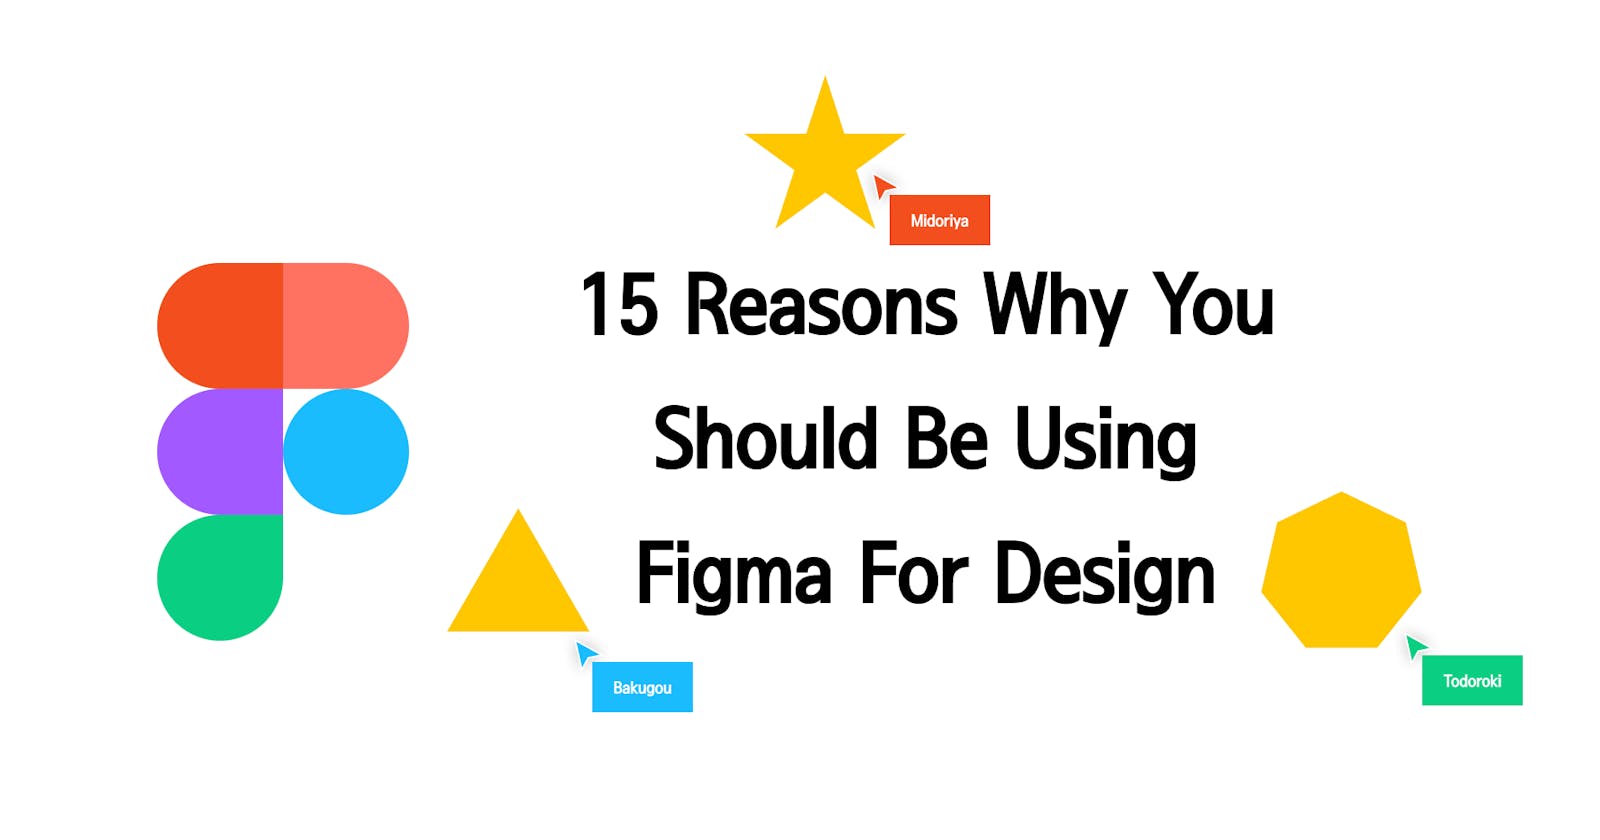 15 reasons why you should be using Figma for design